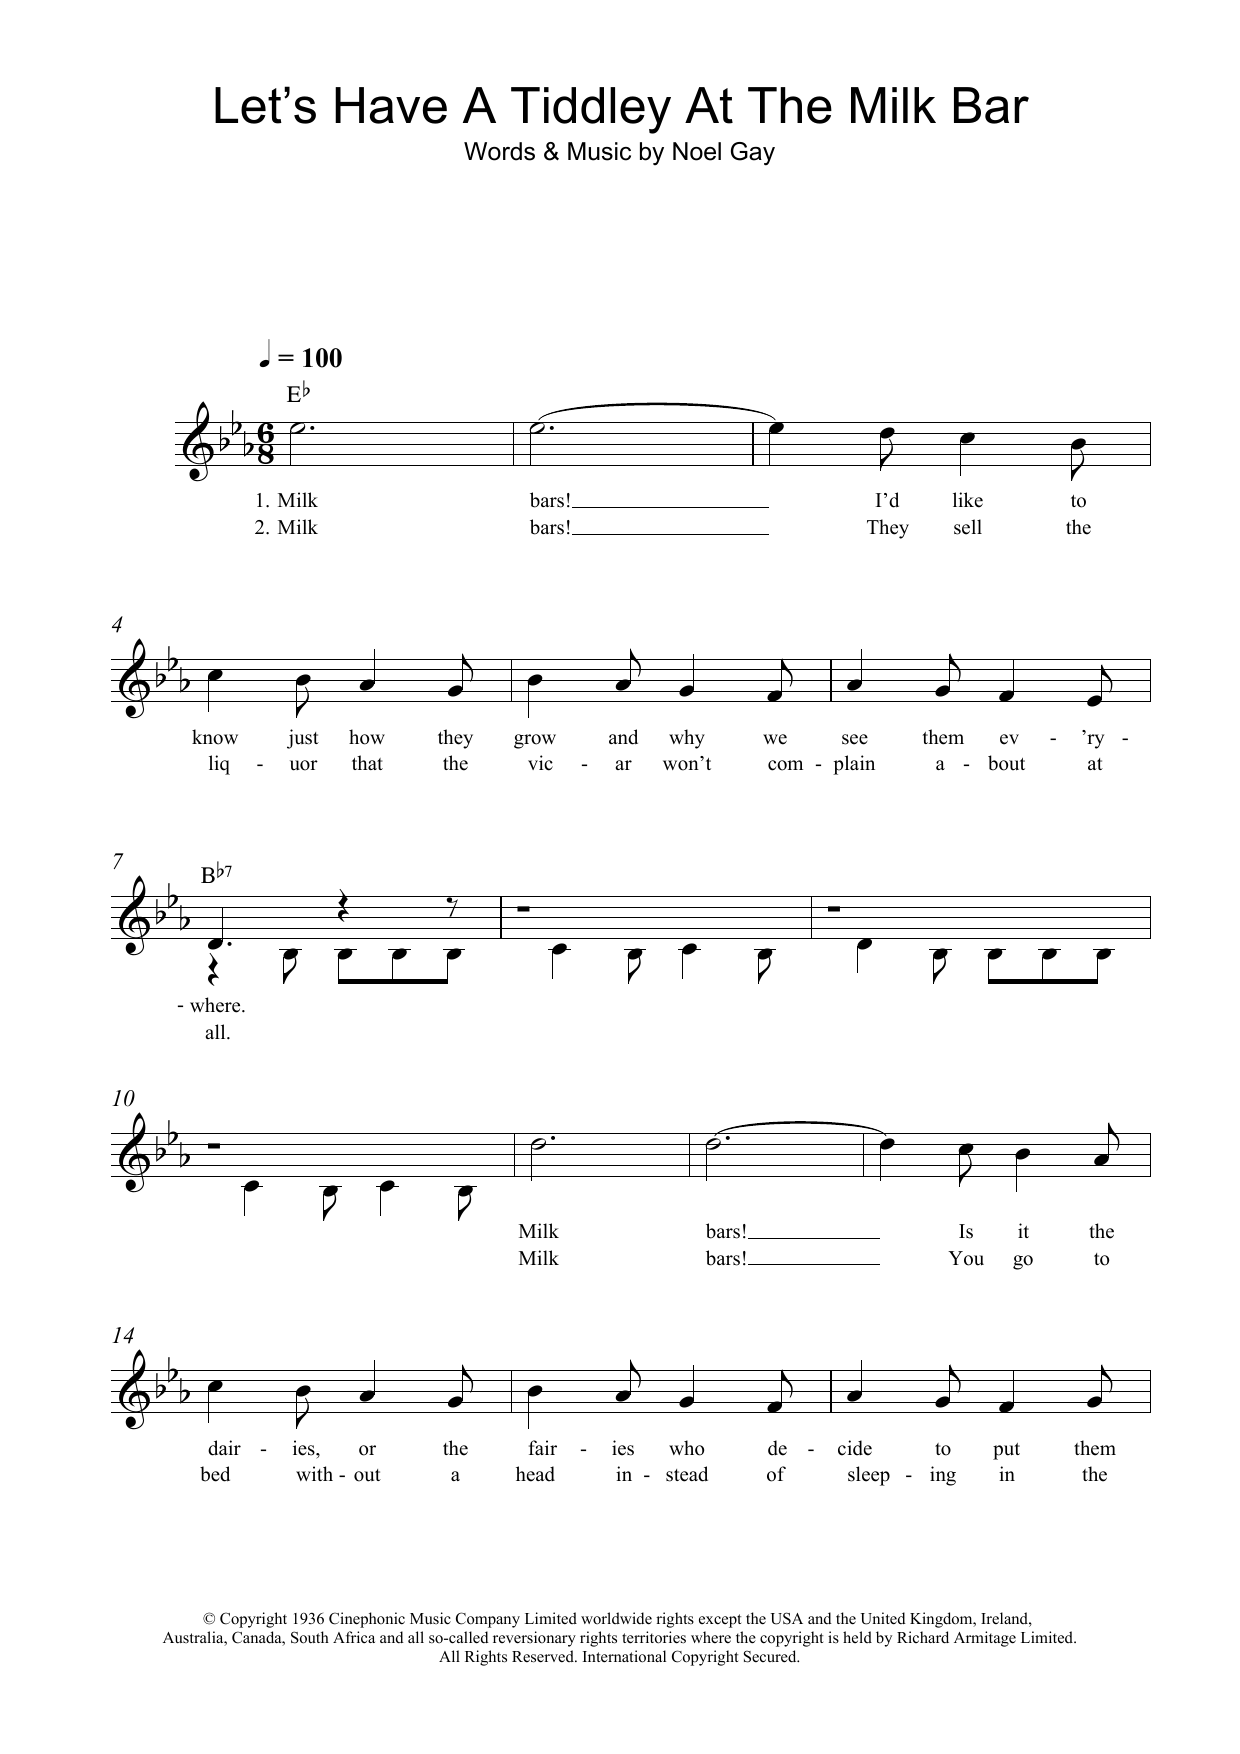 Download Noel Gay Let's Have A Tiddley At The Milk Bar Sheet Music